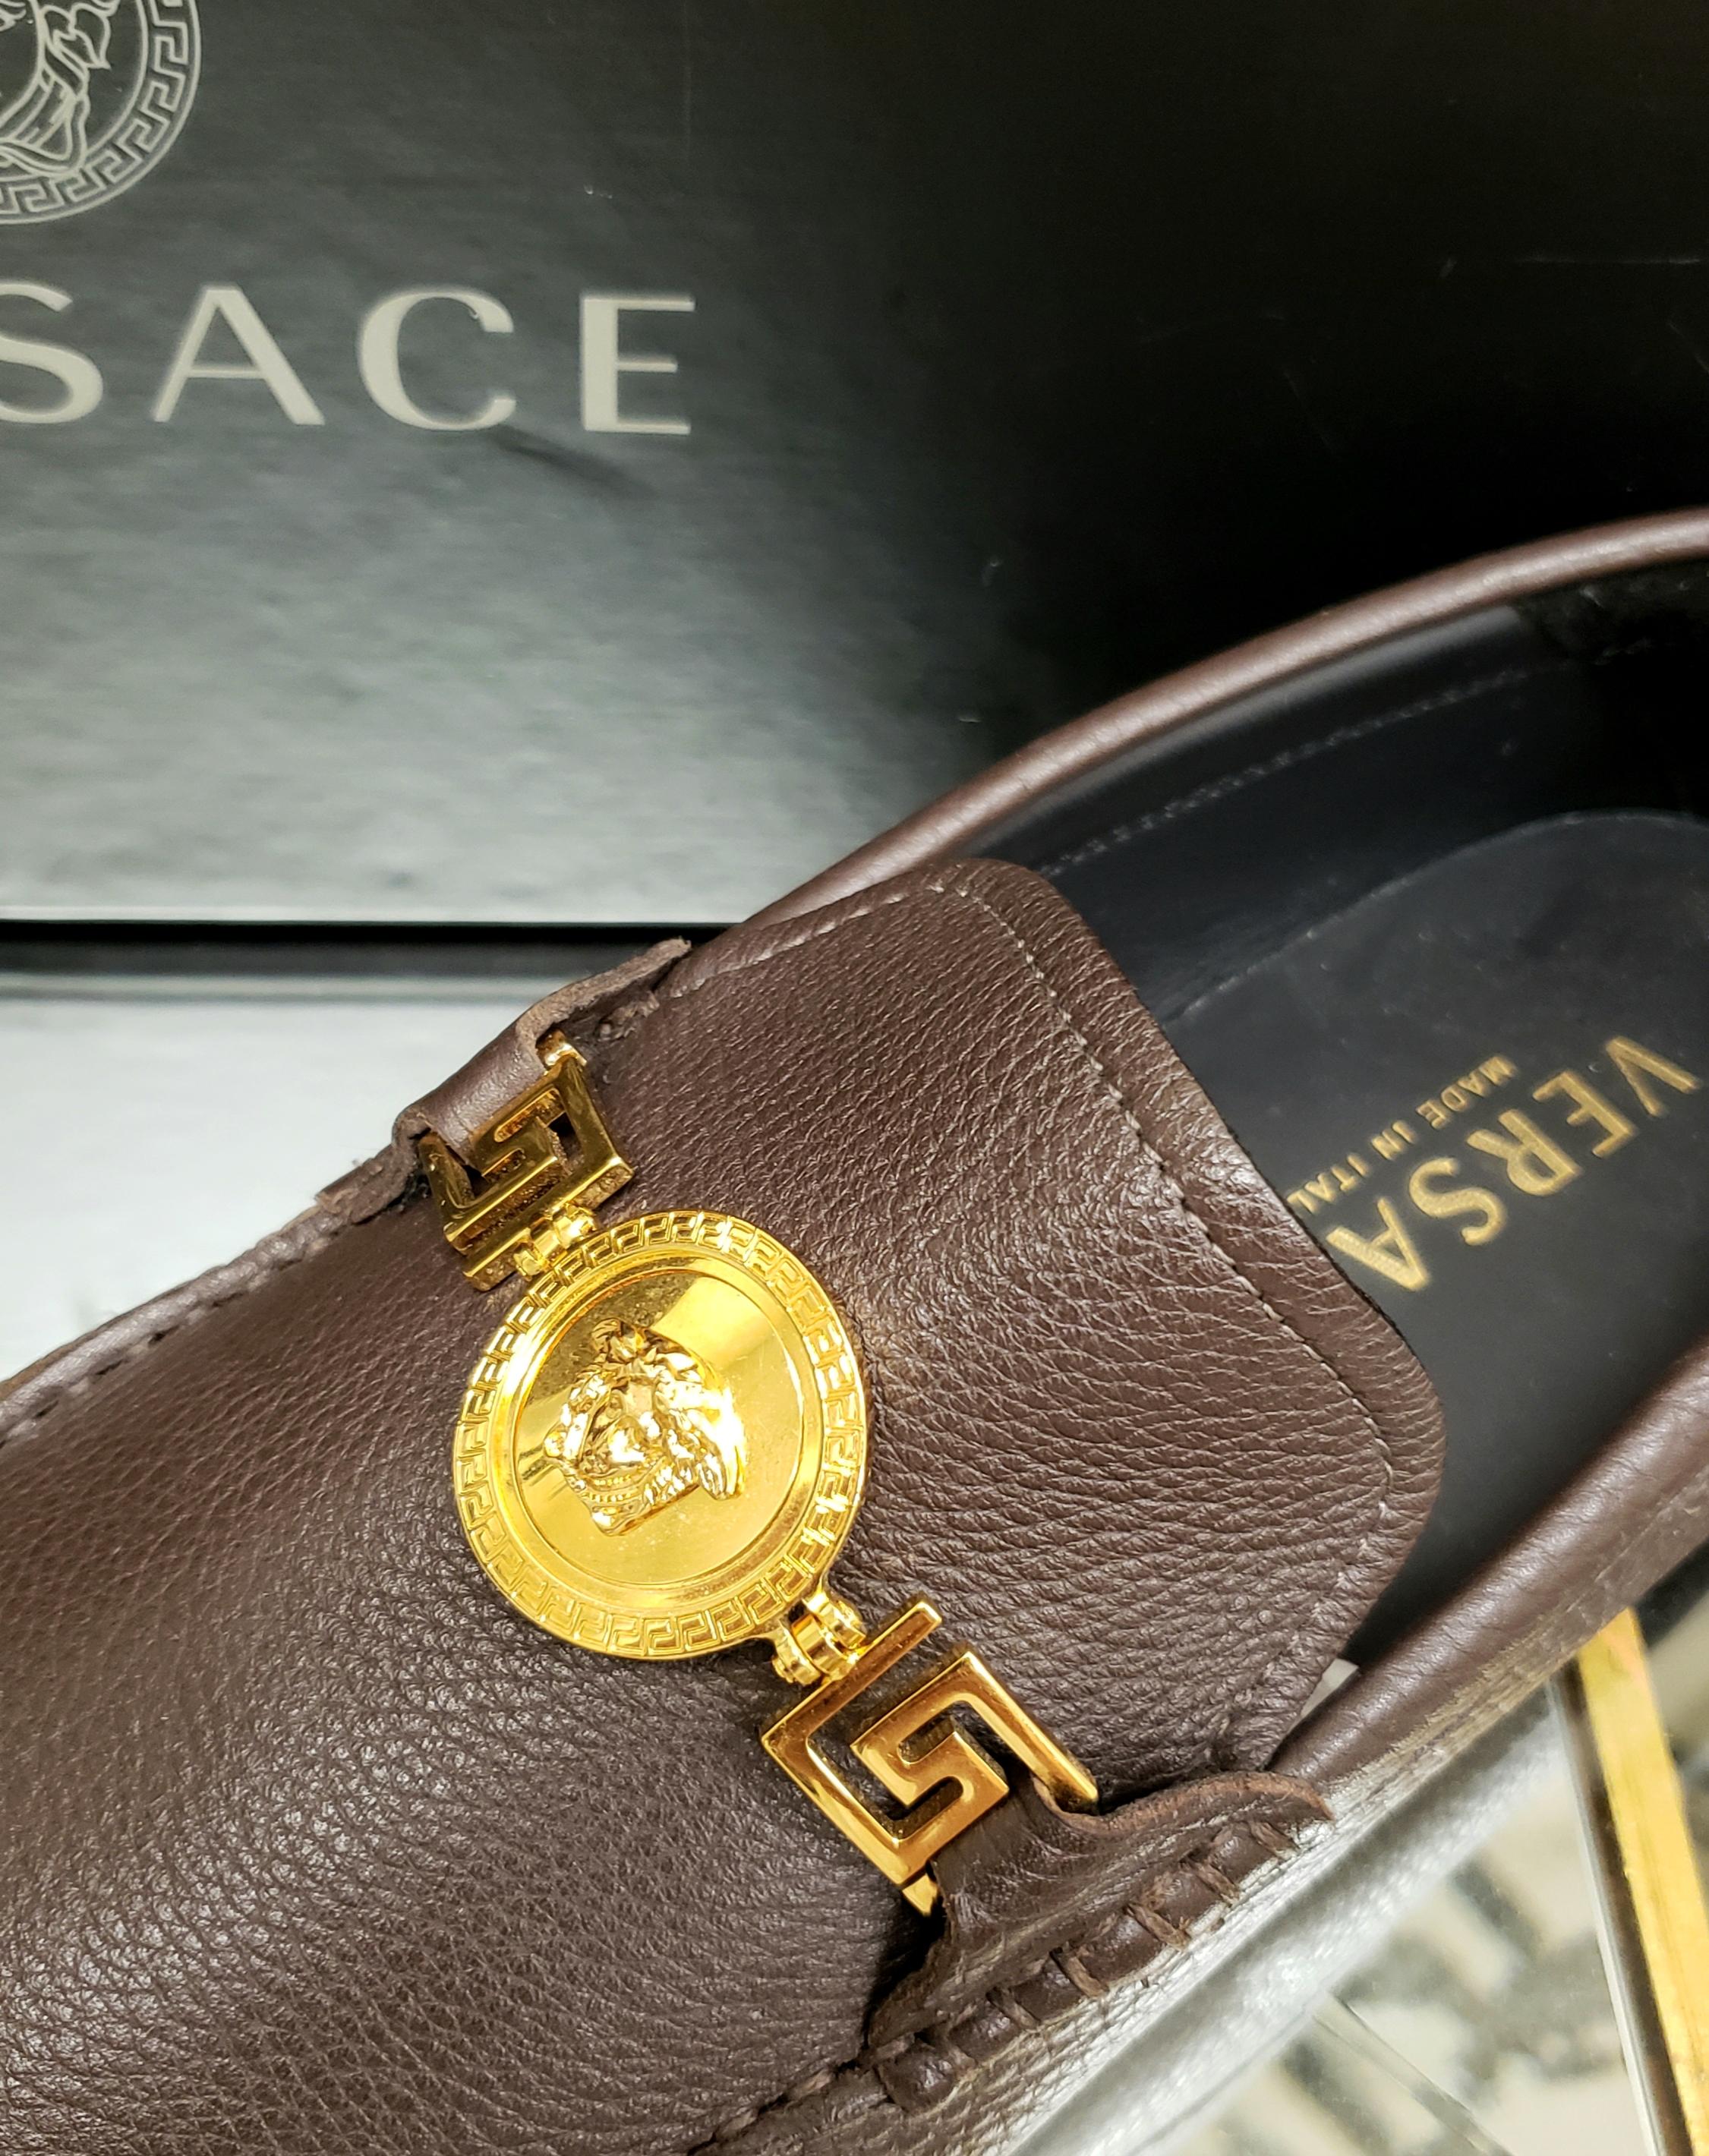 Men's VERSACE BROWN LEATHER LOAFER SHOES w/MEDUSA MEDALLION as seen in movie Sz 9.5 For Sale